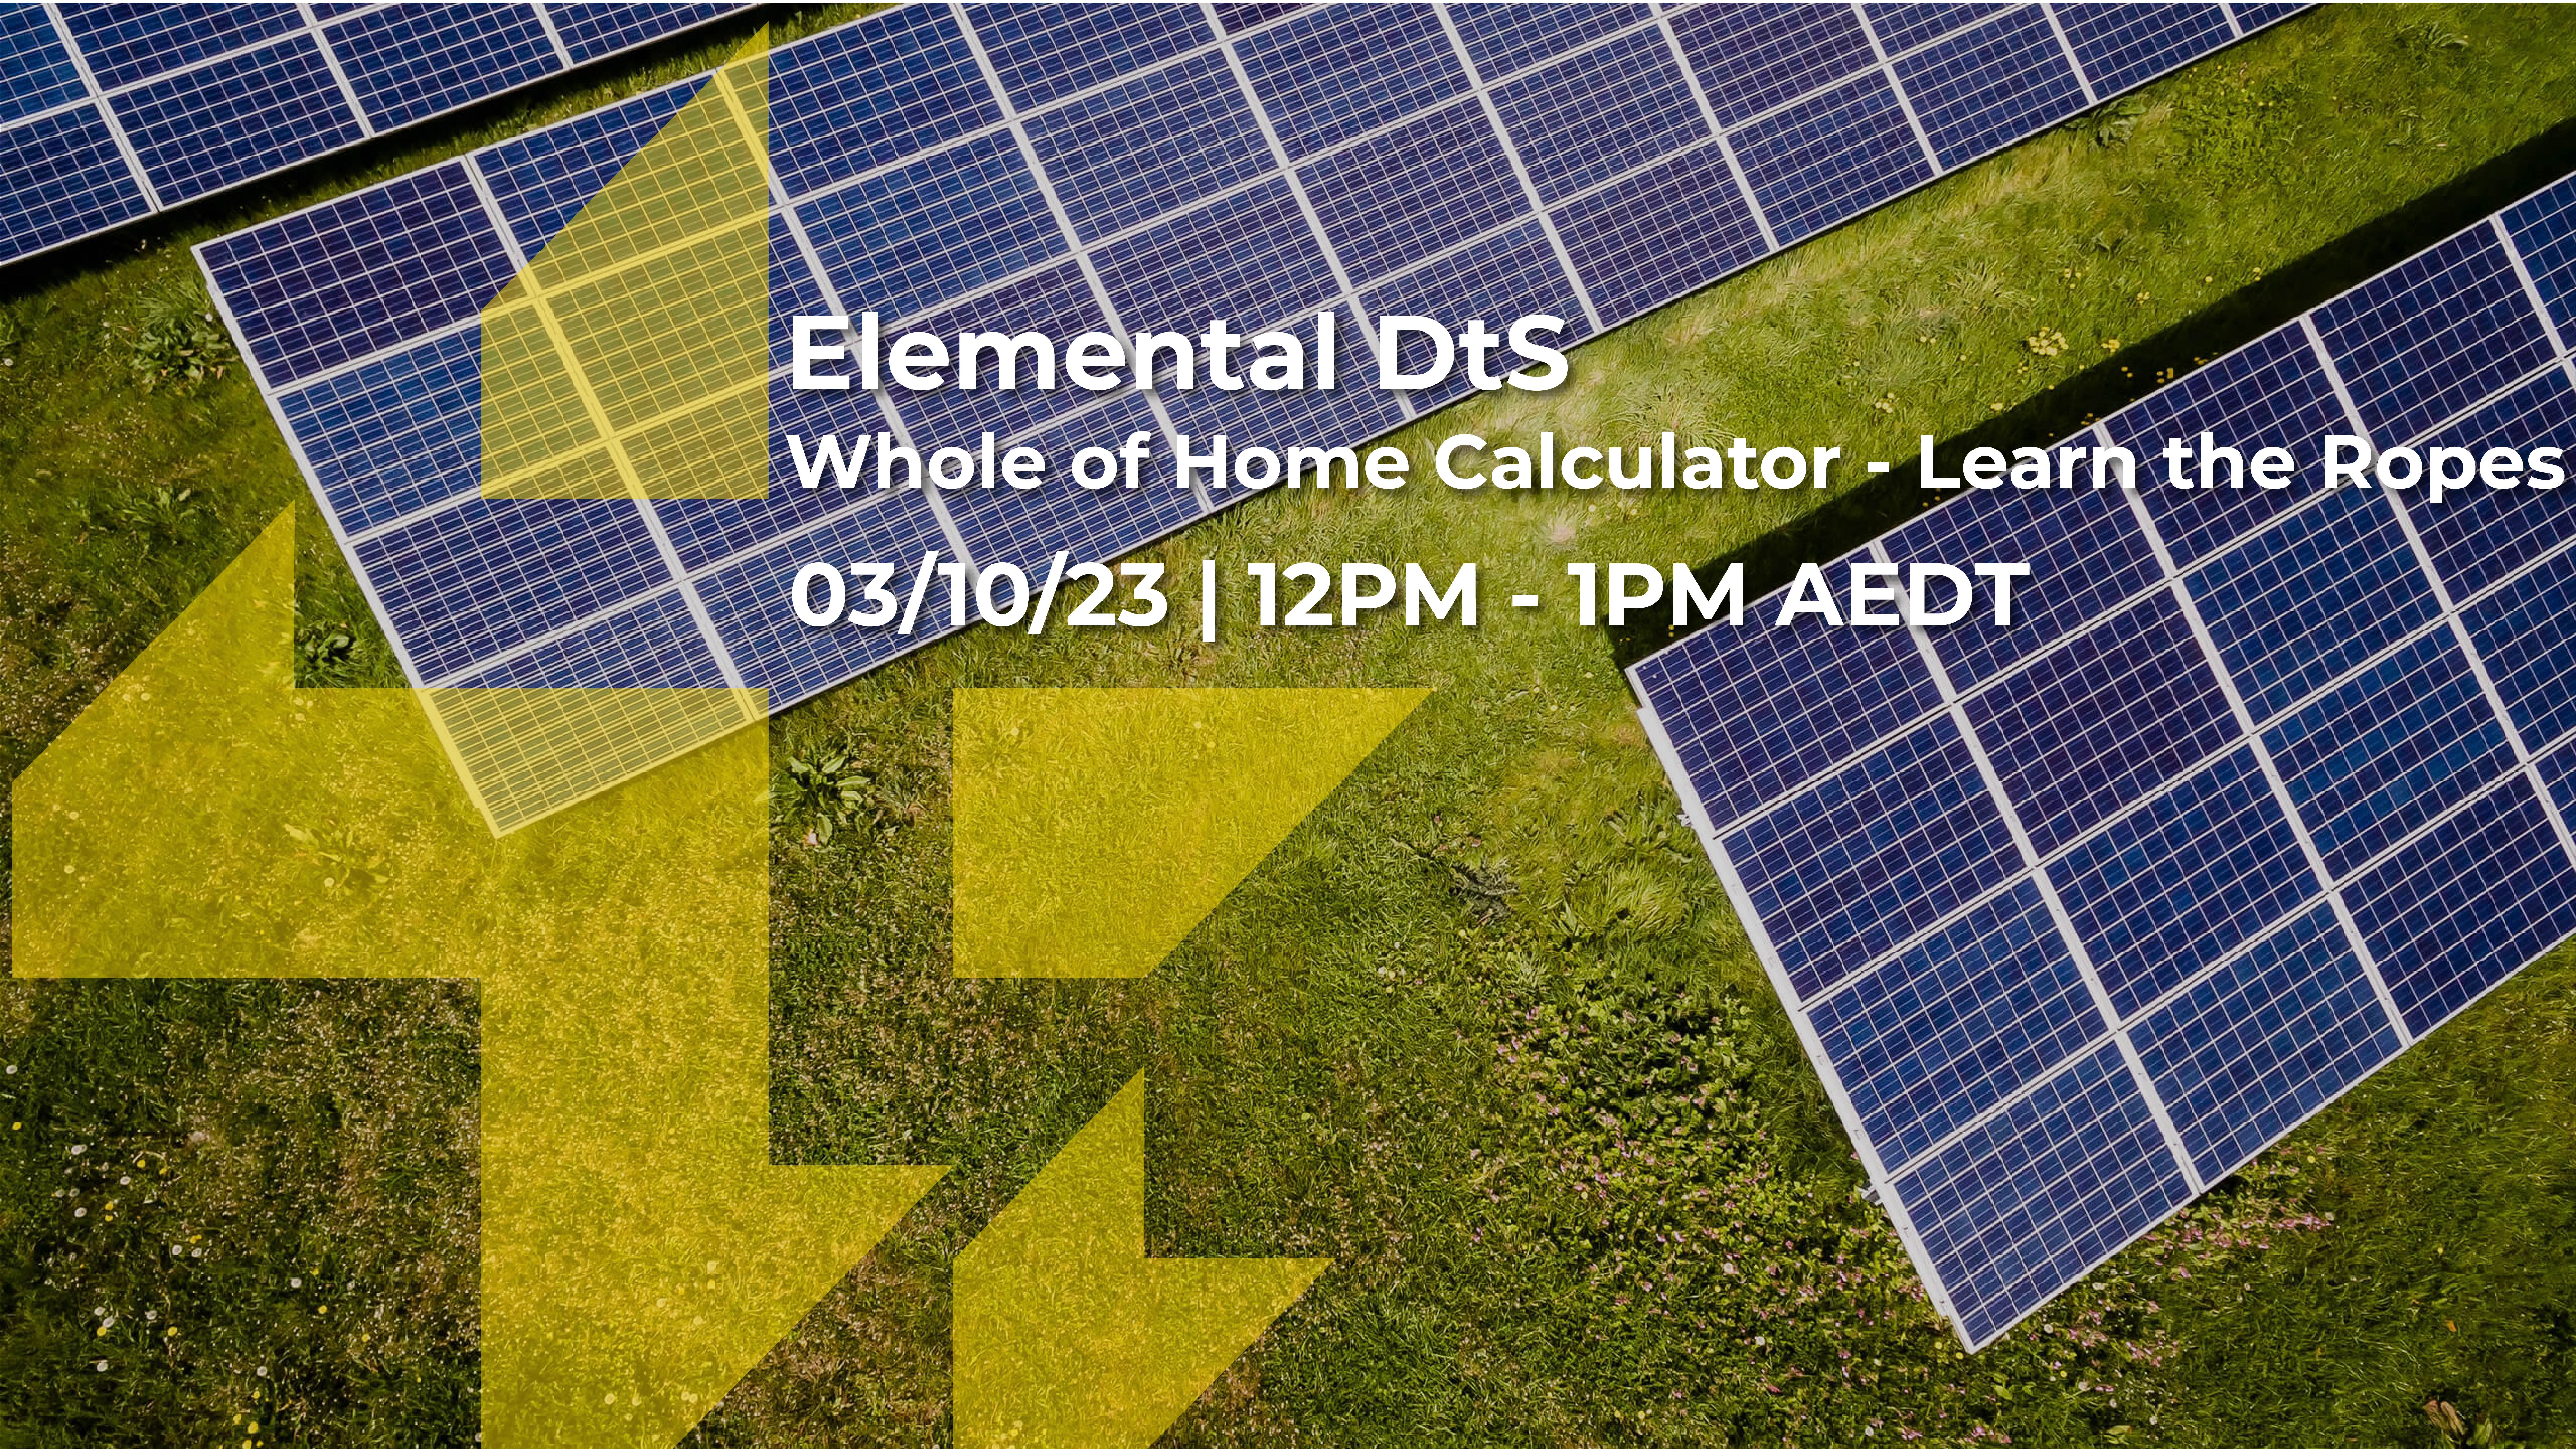 Elemental DtS - Whole of Home Calculator - Learn the Ropes